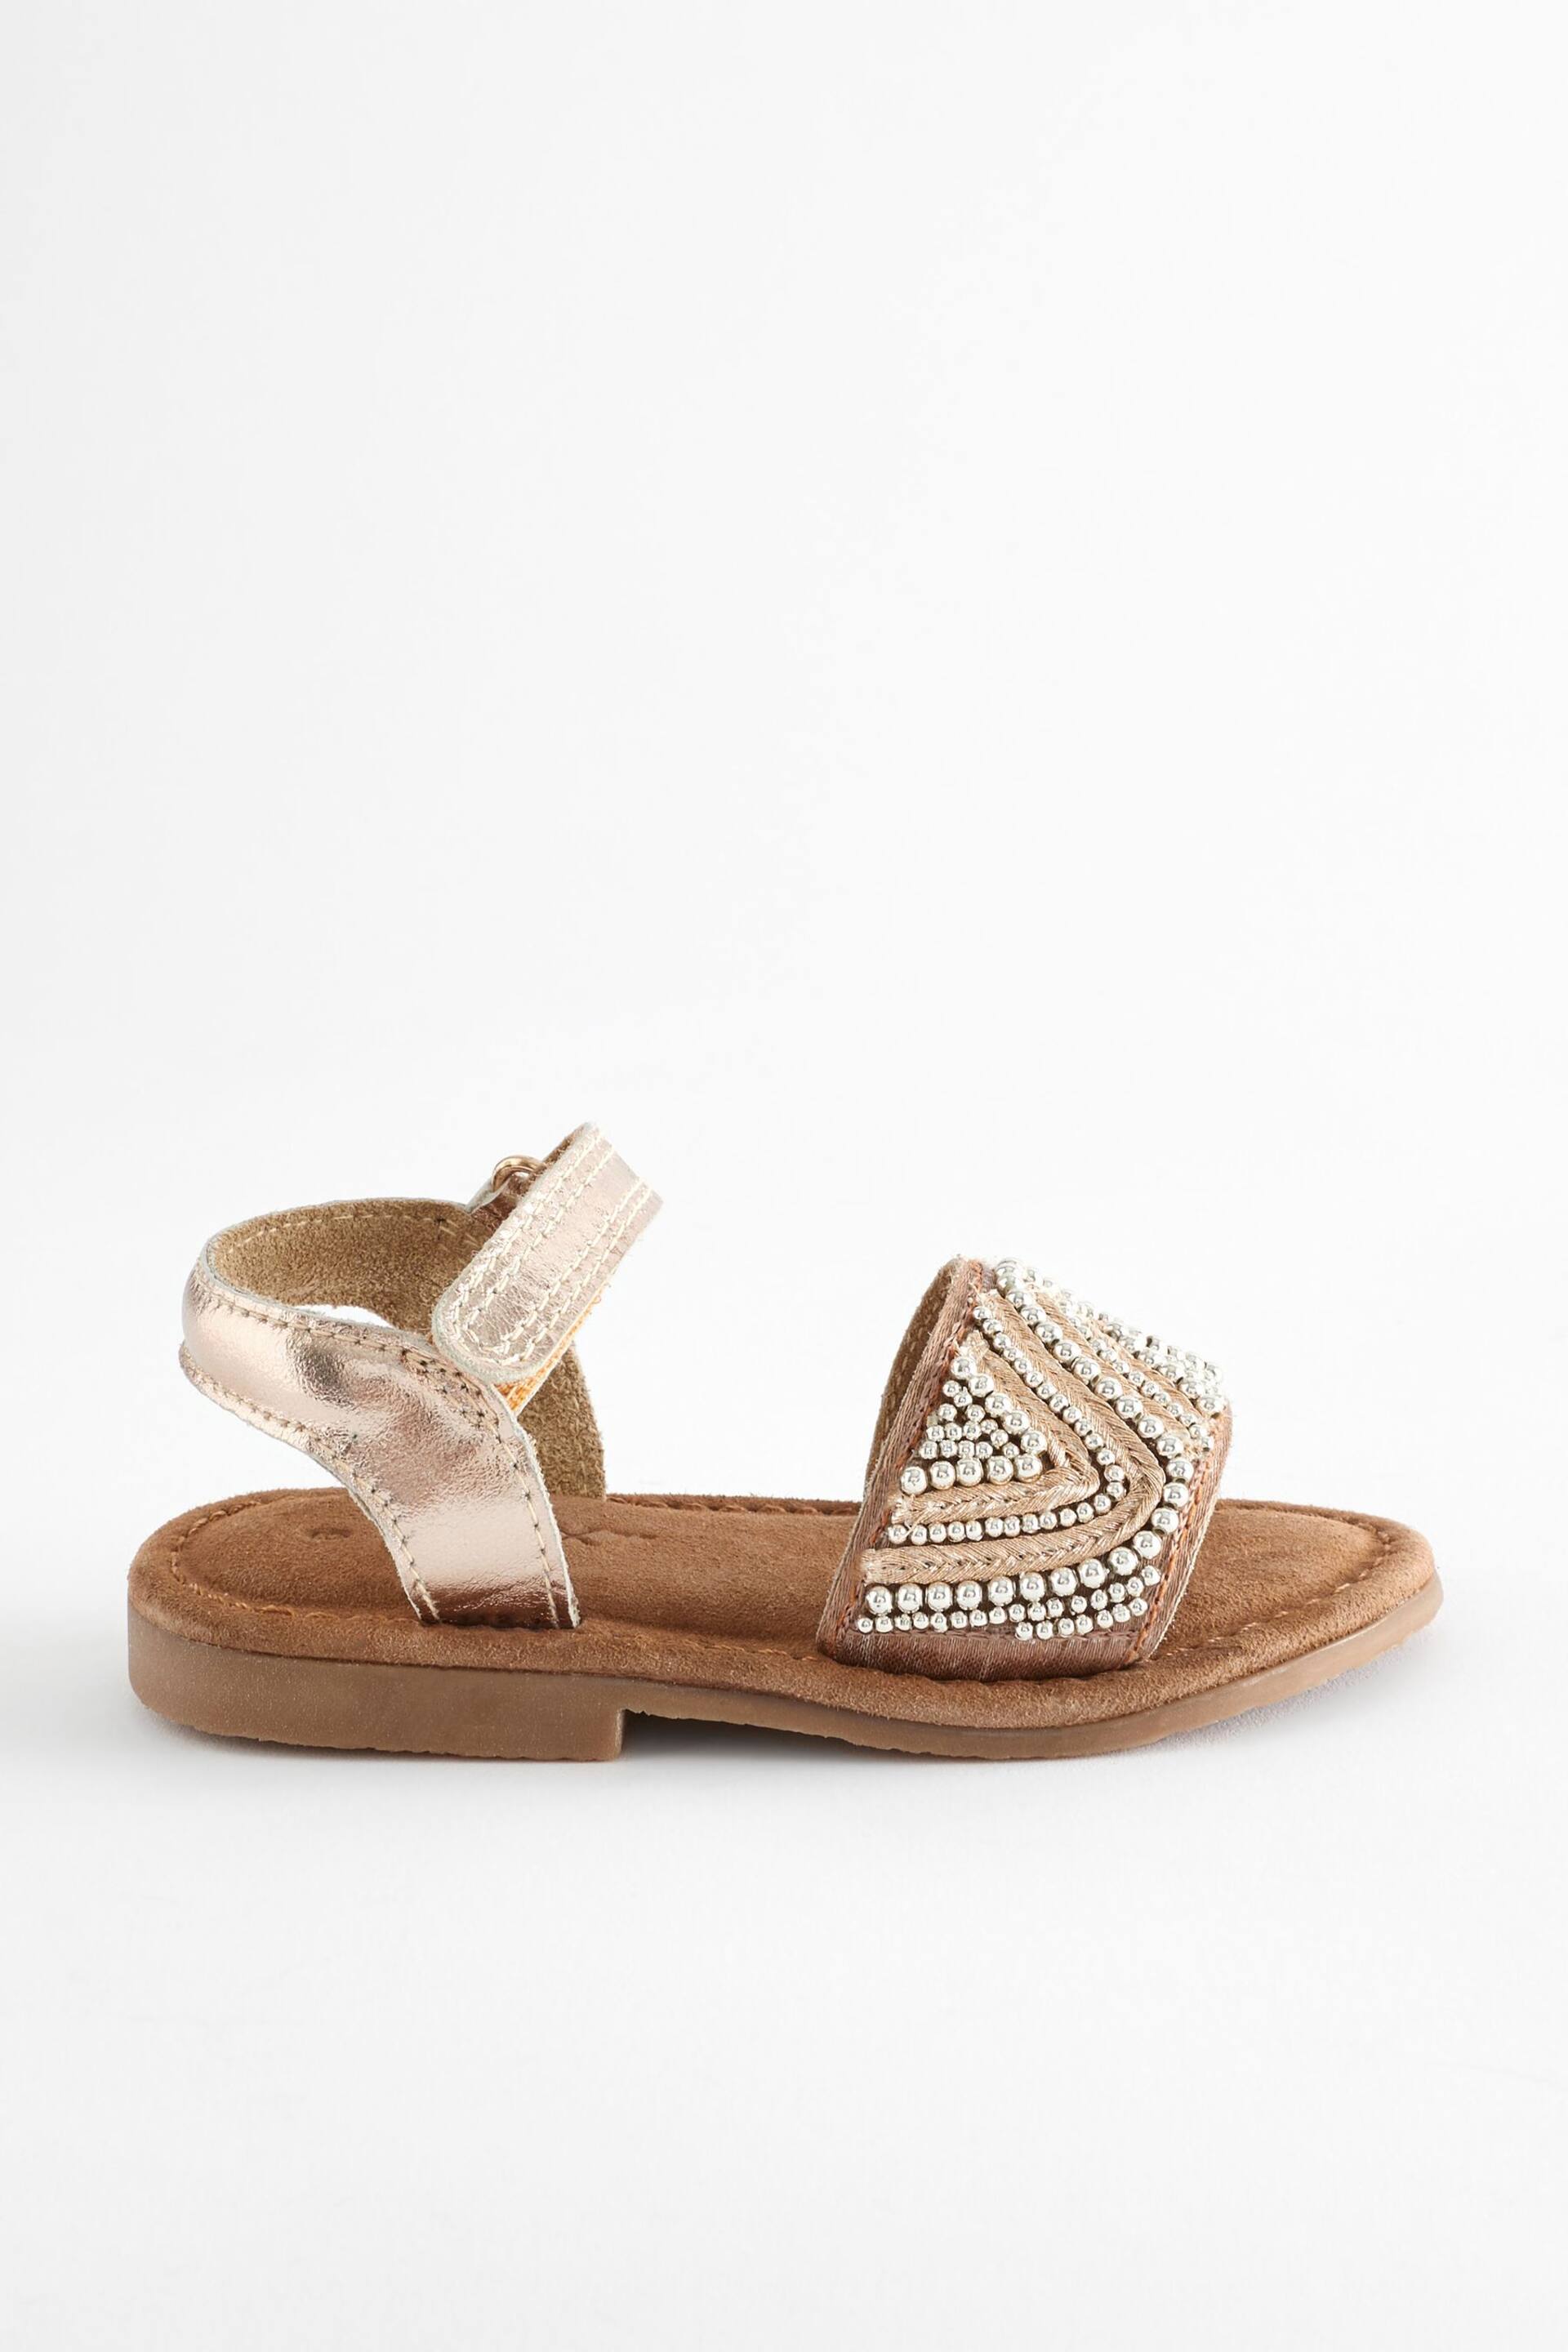 Rose Gold Beaded Occasion Sandals - Image 6 of 10